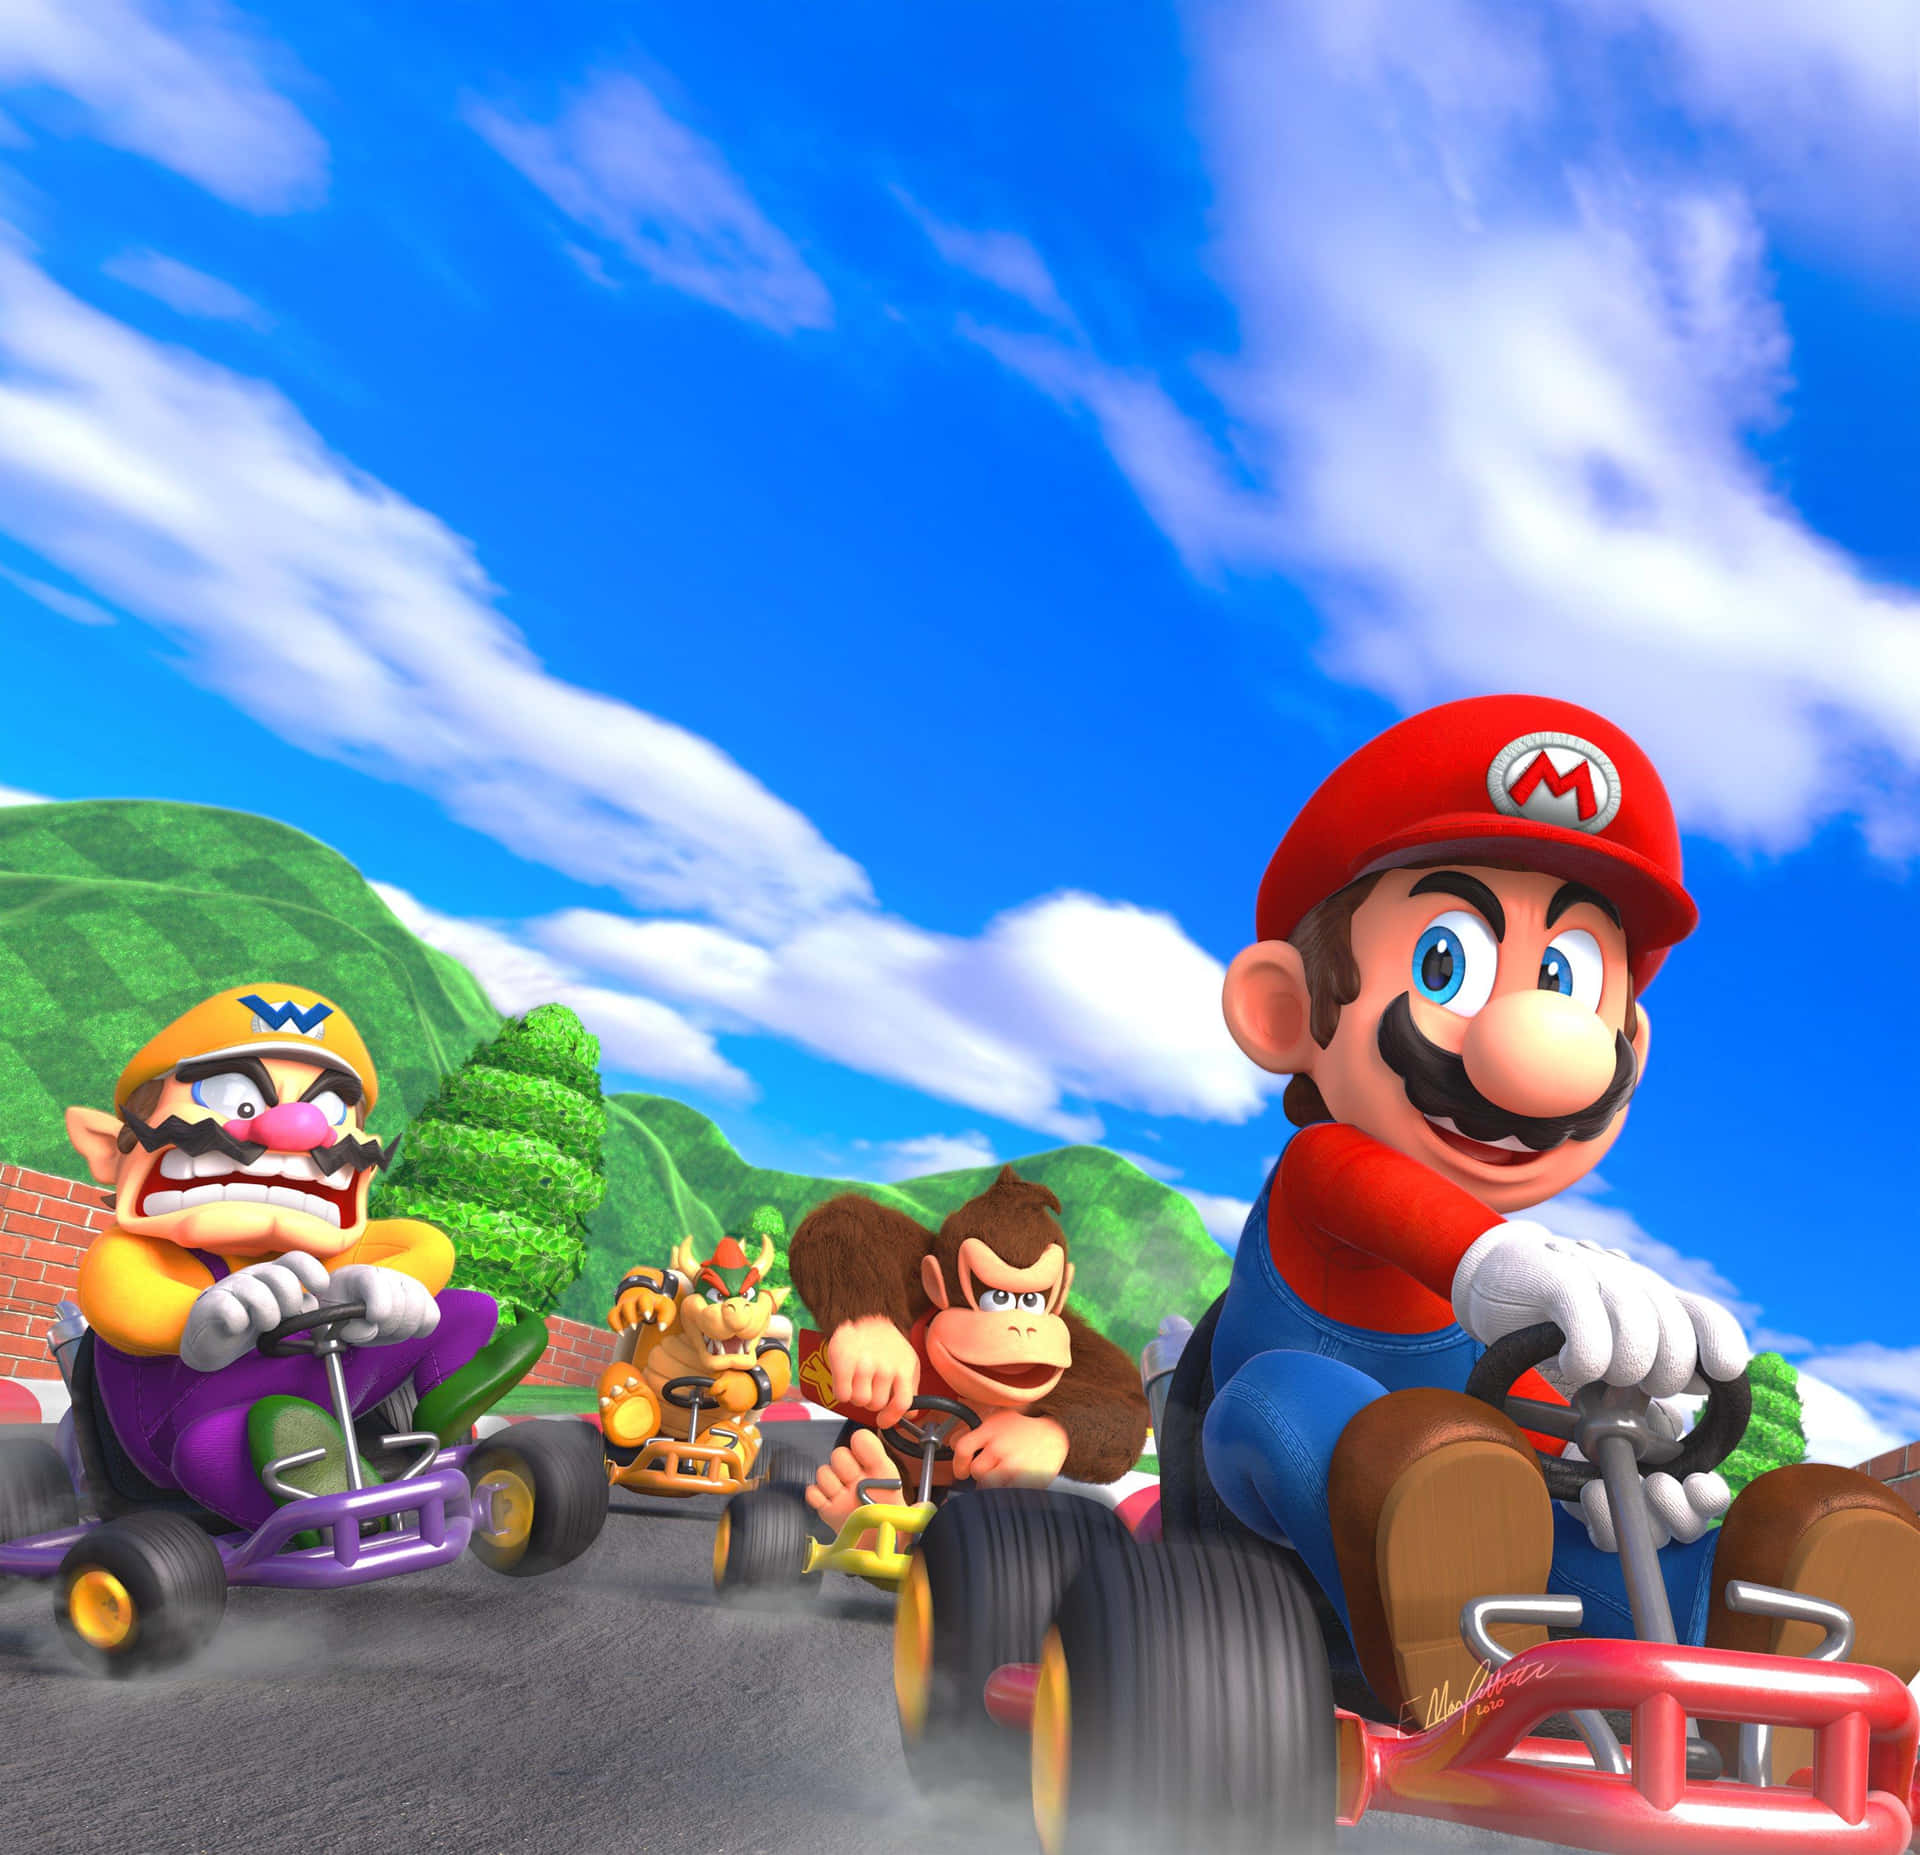 Get Ready to Race in Mario Kart!